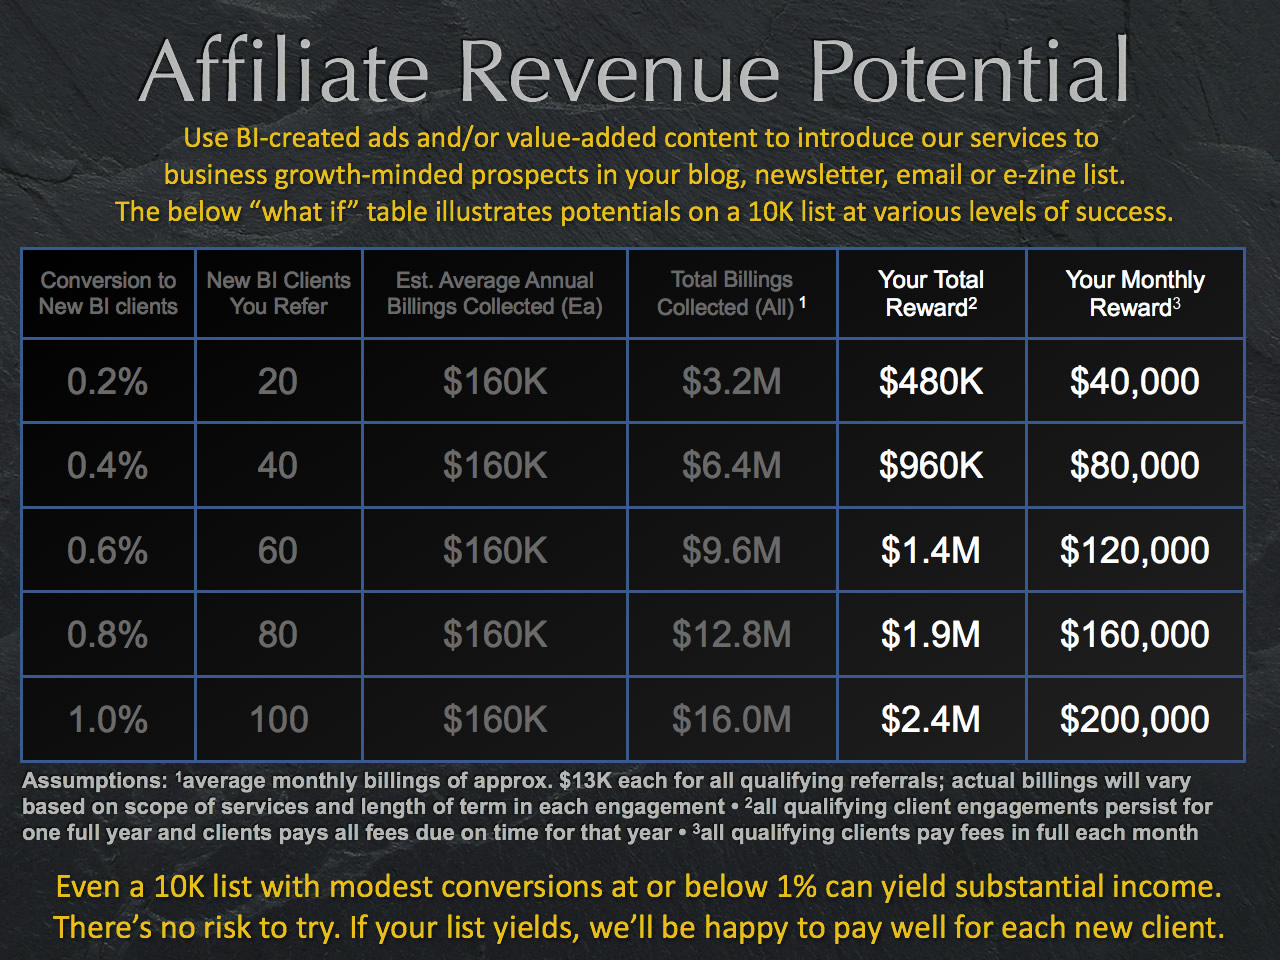 bloggers, video hosts, etc can aim for much higher affiliate income via referral